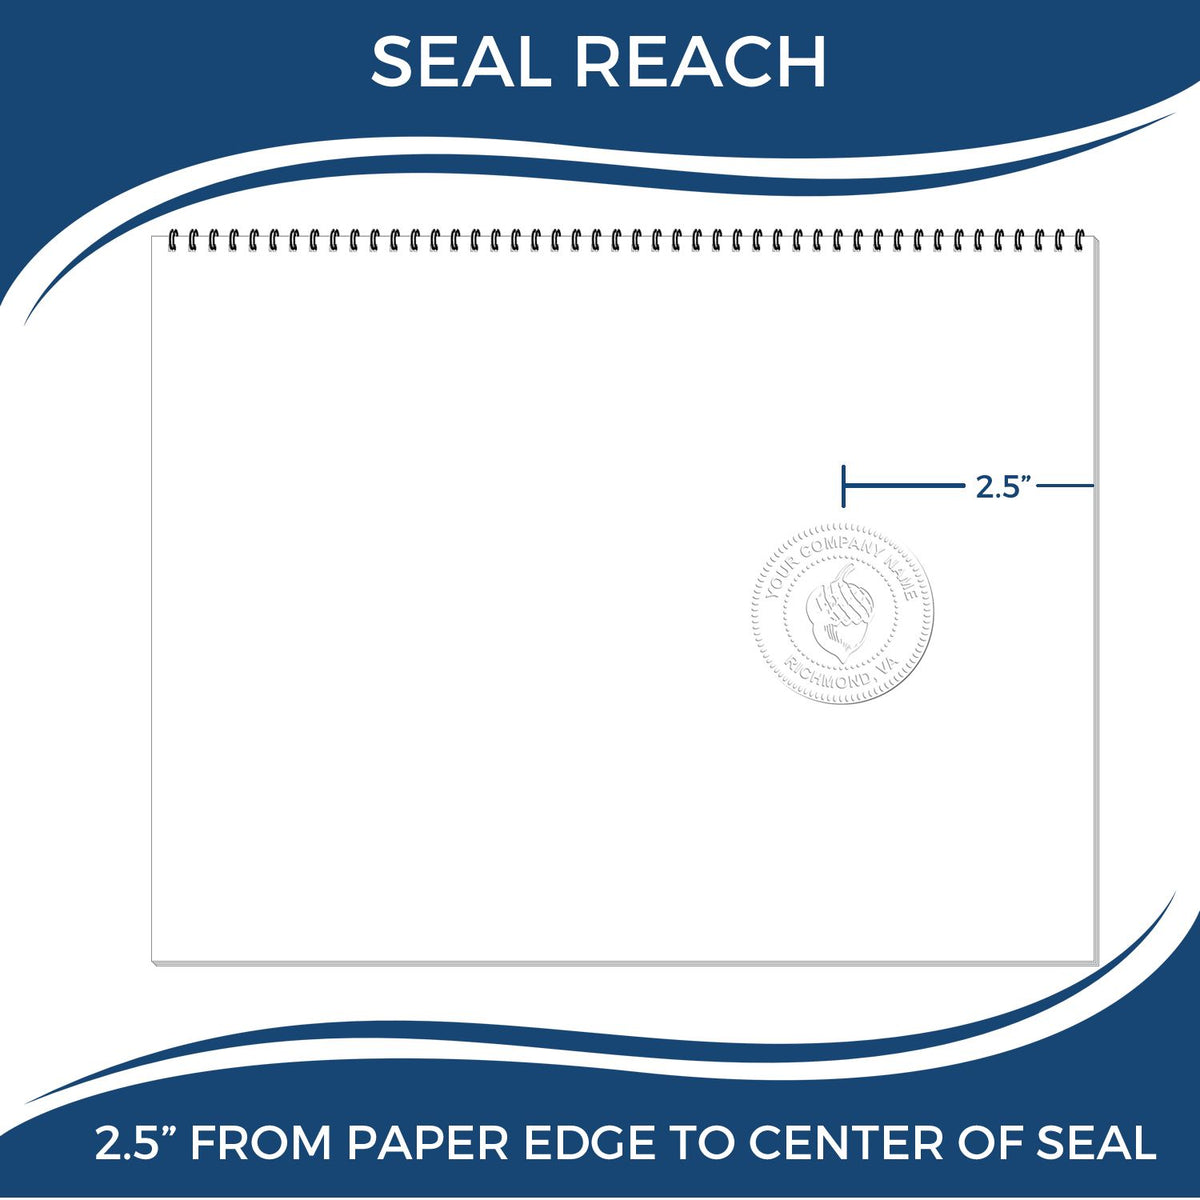 An infographic showing the seal reach which is represented by a ruler and a miniature seal image of the Heavy Duty Cast Iron Wisconsin Geologist Seal Embosser